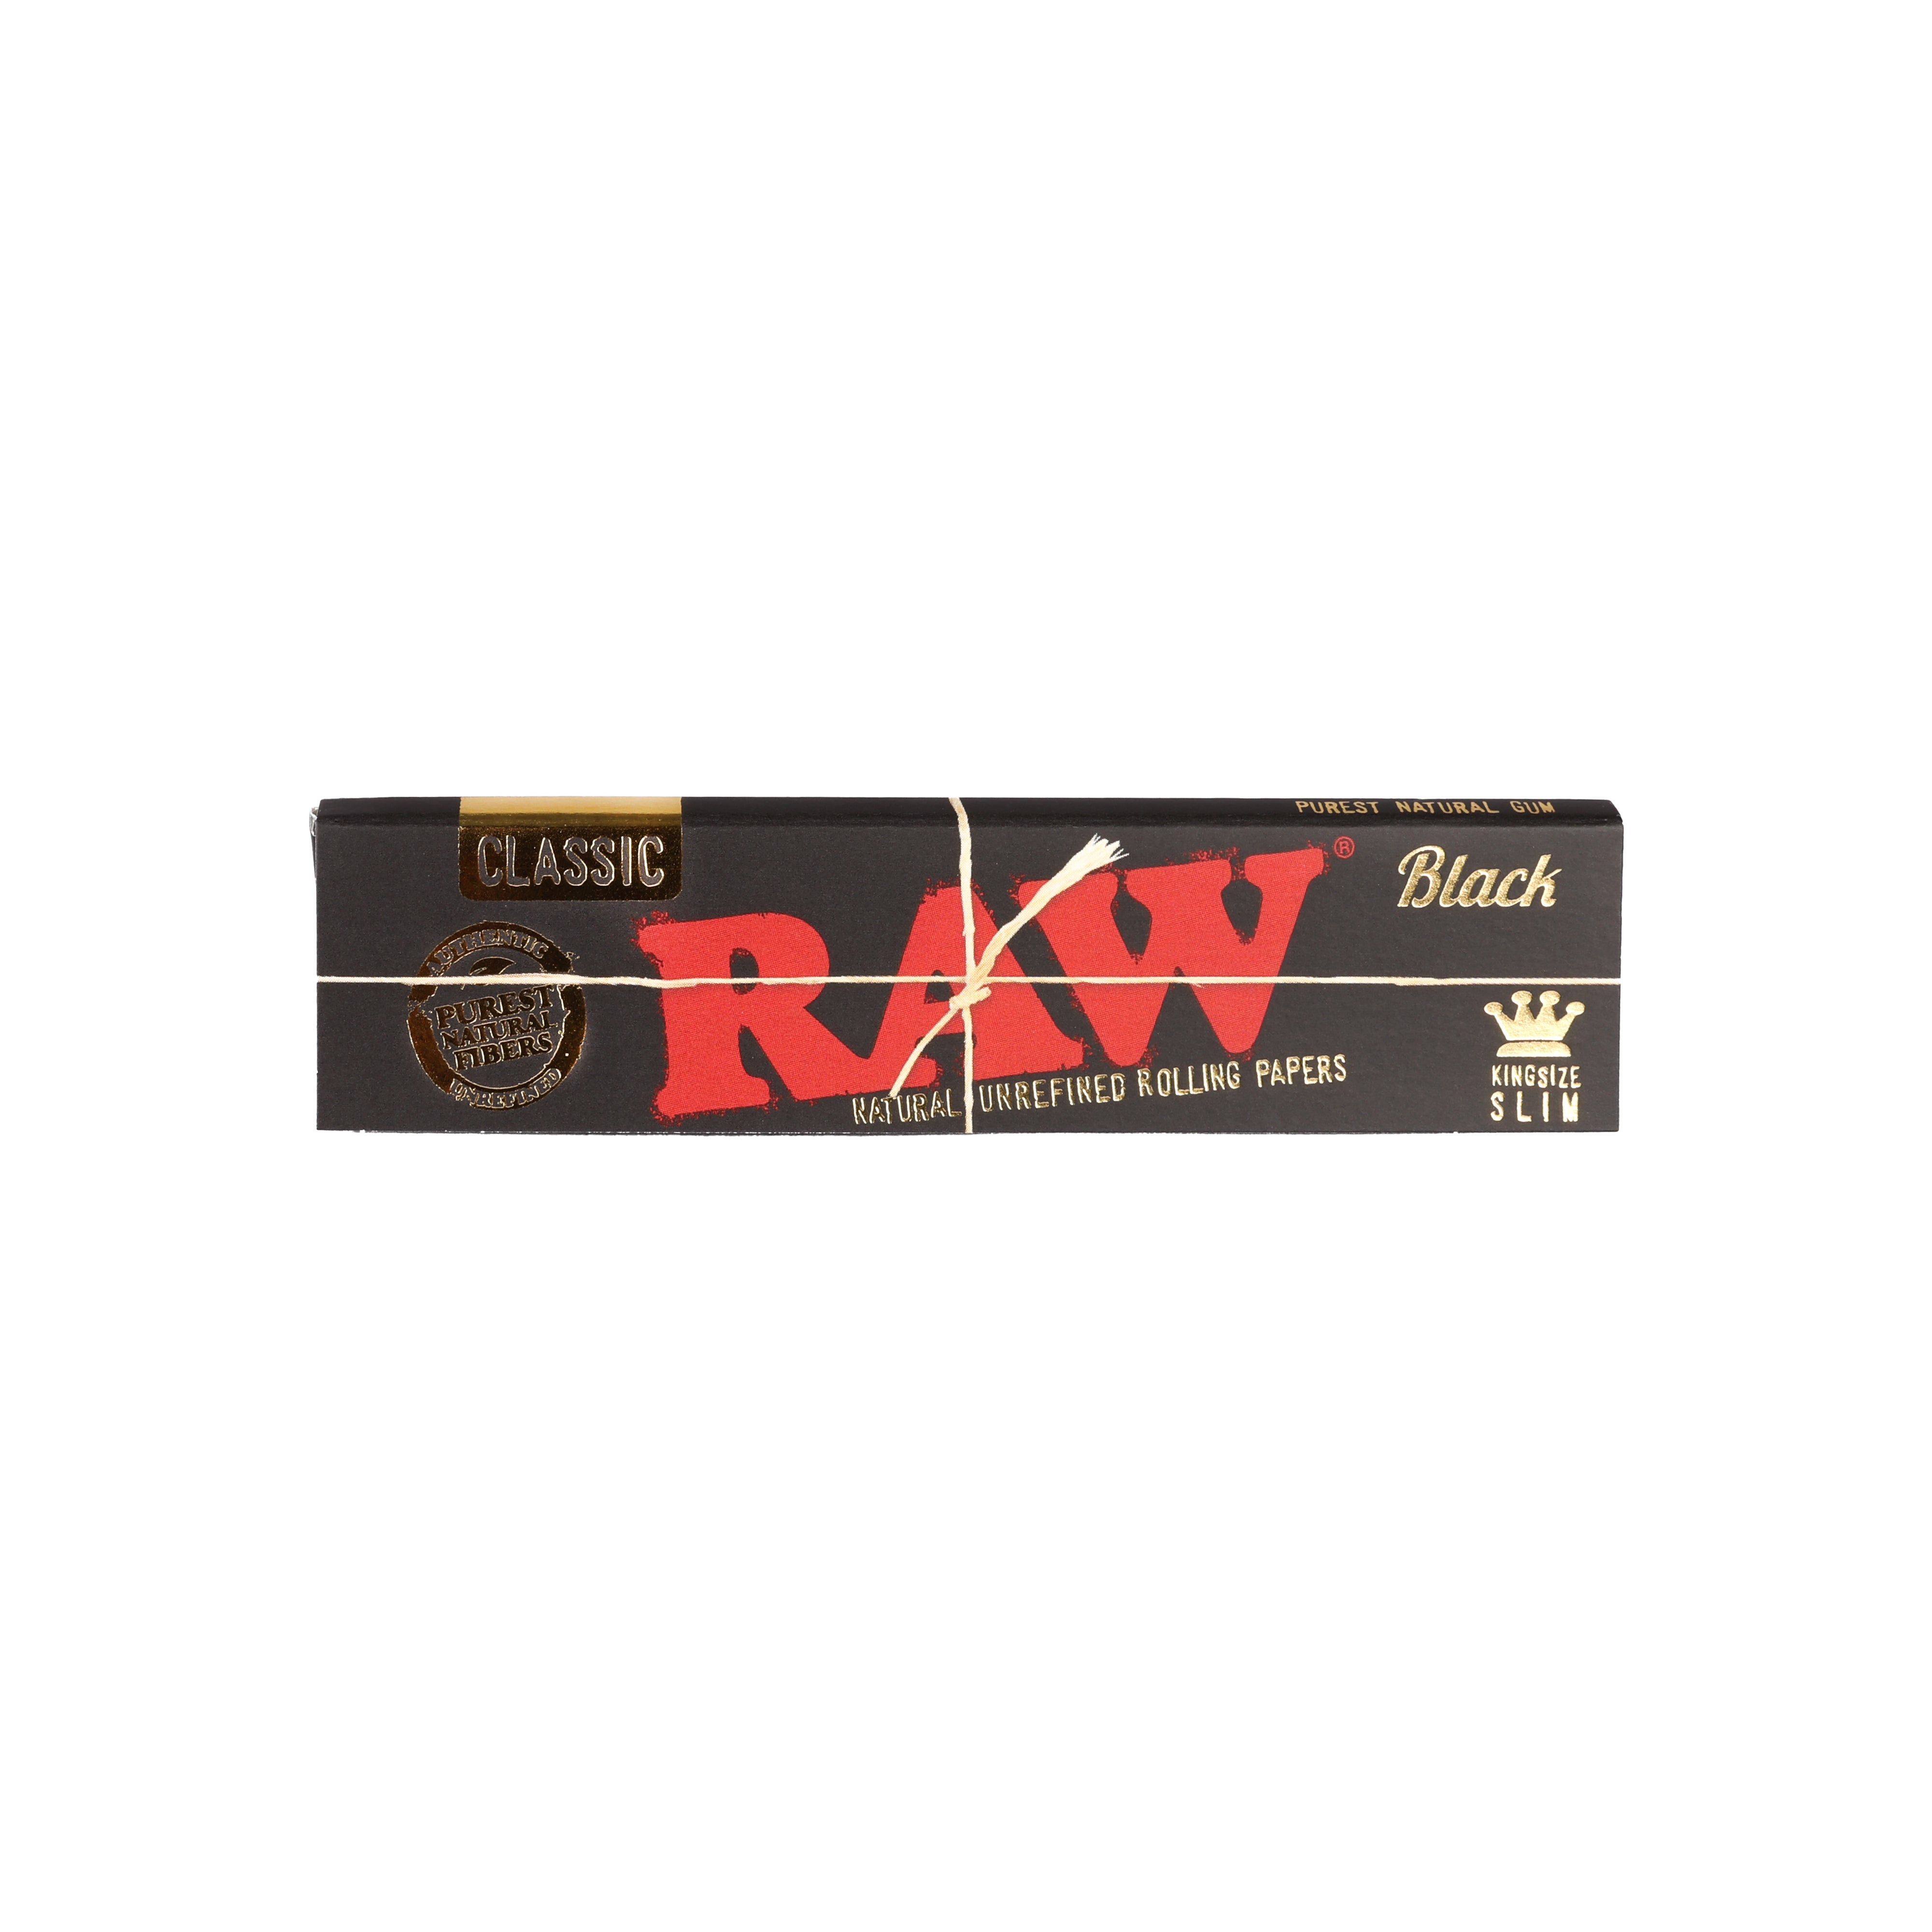 RAW Black Classic Rolling Paper, 1 pack, 32 leaves, King size